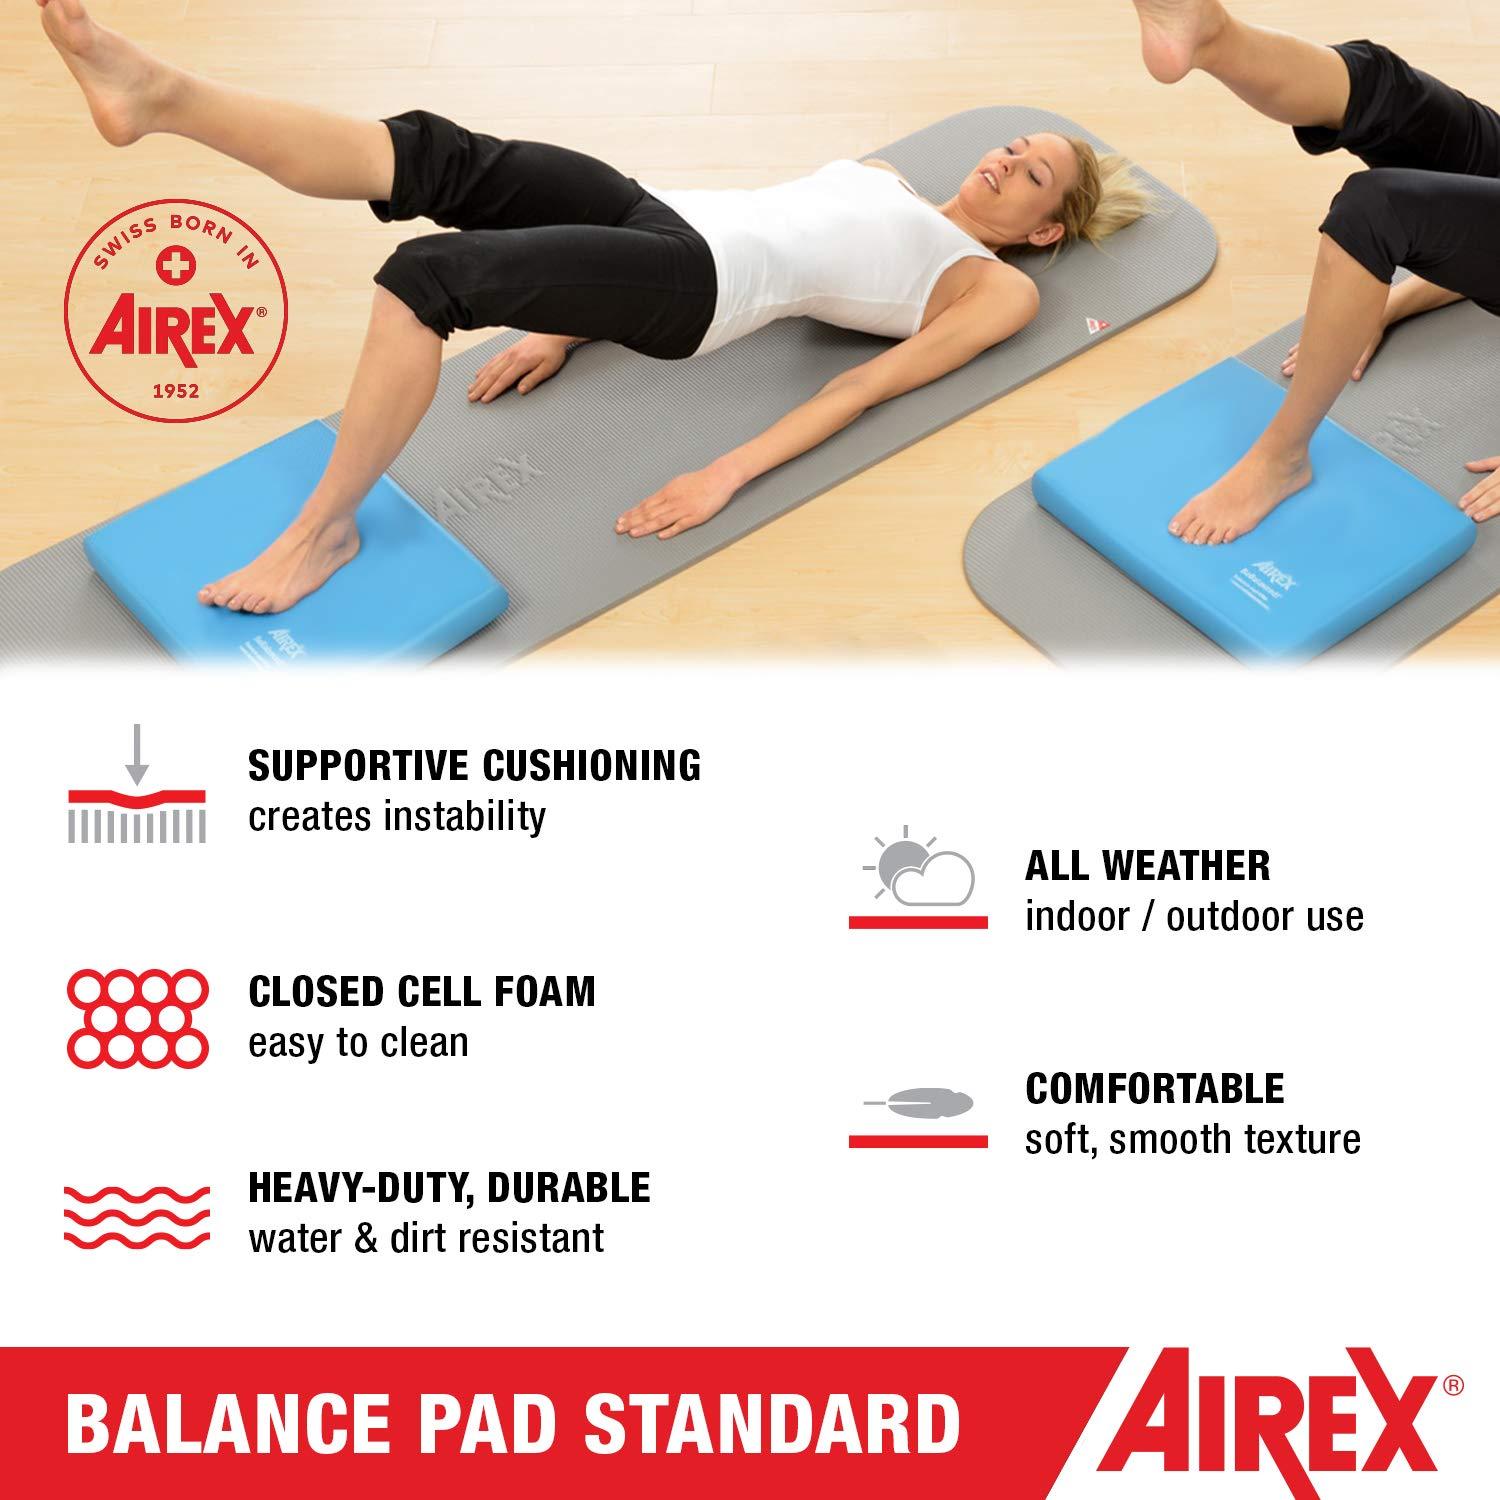  AIREX Balance Pad Basic – Stability Trainer for Balance,  Stretching, Physical Therapy, Exercise, Mobility, Rehabilitation and Core  Training Non-Slip Closed Cell Foam Premium Balance Pad, Blue, (30-1907) :  Sports & Outdoors